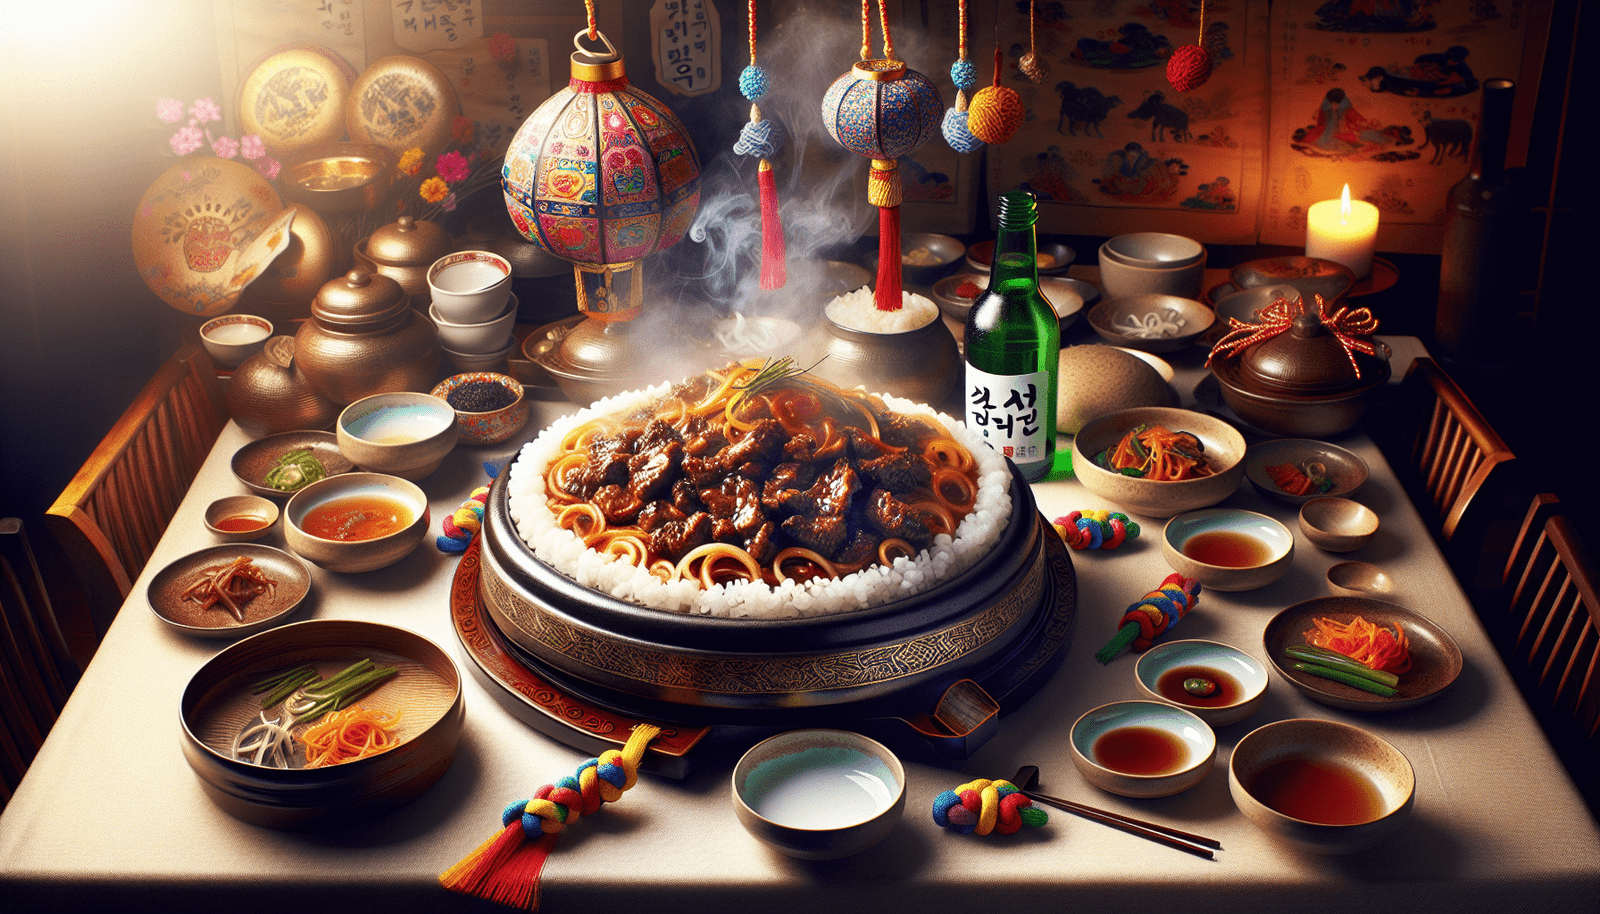 Can You Recommend Traditional Korean Dishes That Are Considered Festive Or Celebratory?